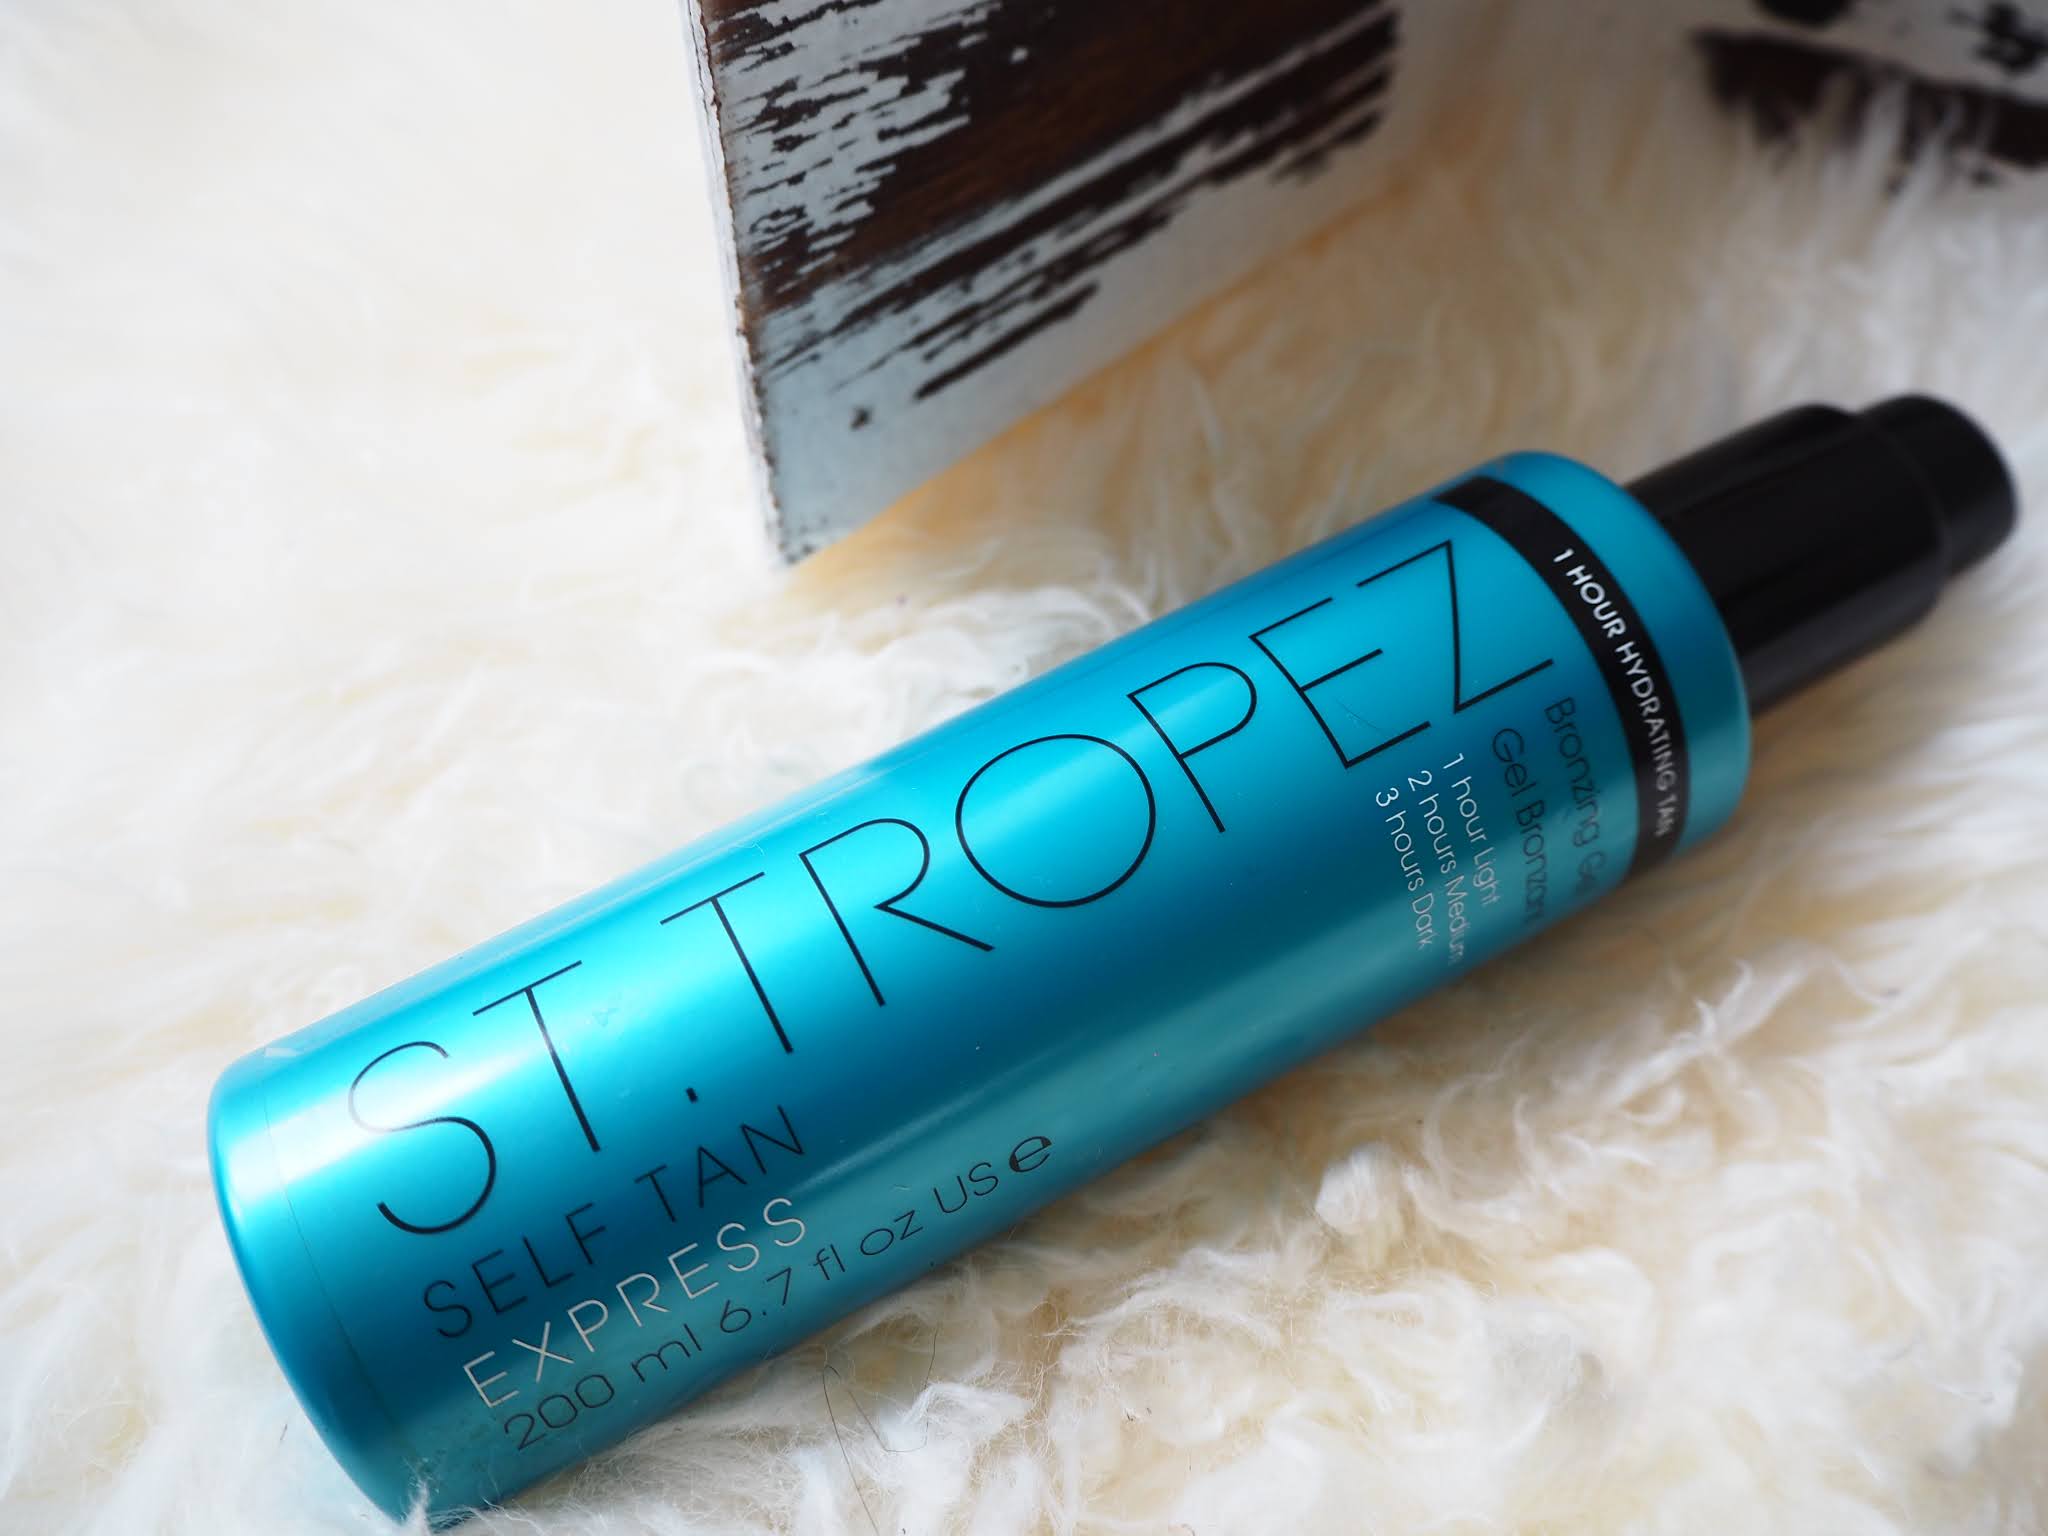 HOW IS THE ST TROPEZ SELF TAN EXPRESS GEL? - TROPEZ TAN EXPRESS GEL REVIEW. | Exclusively